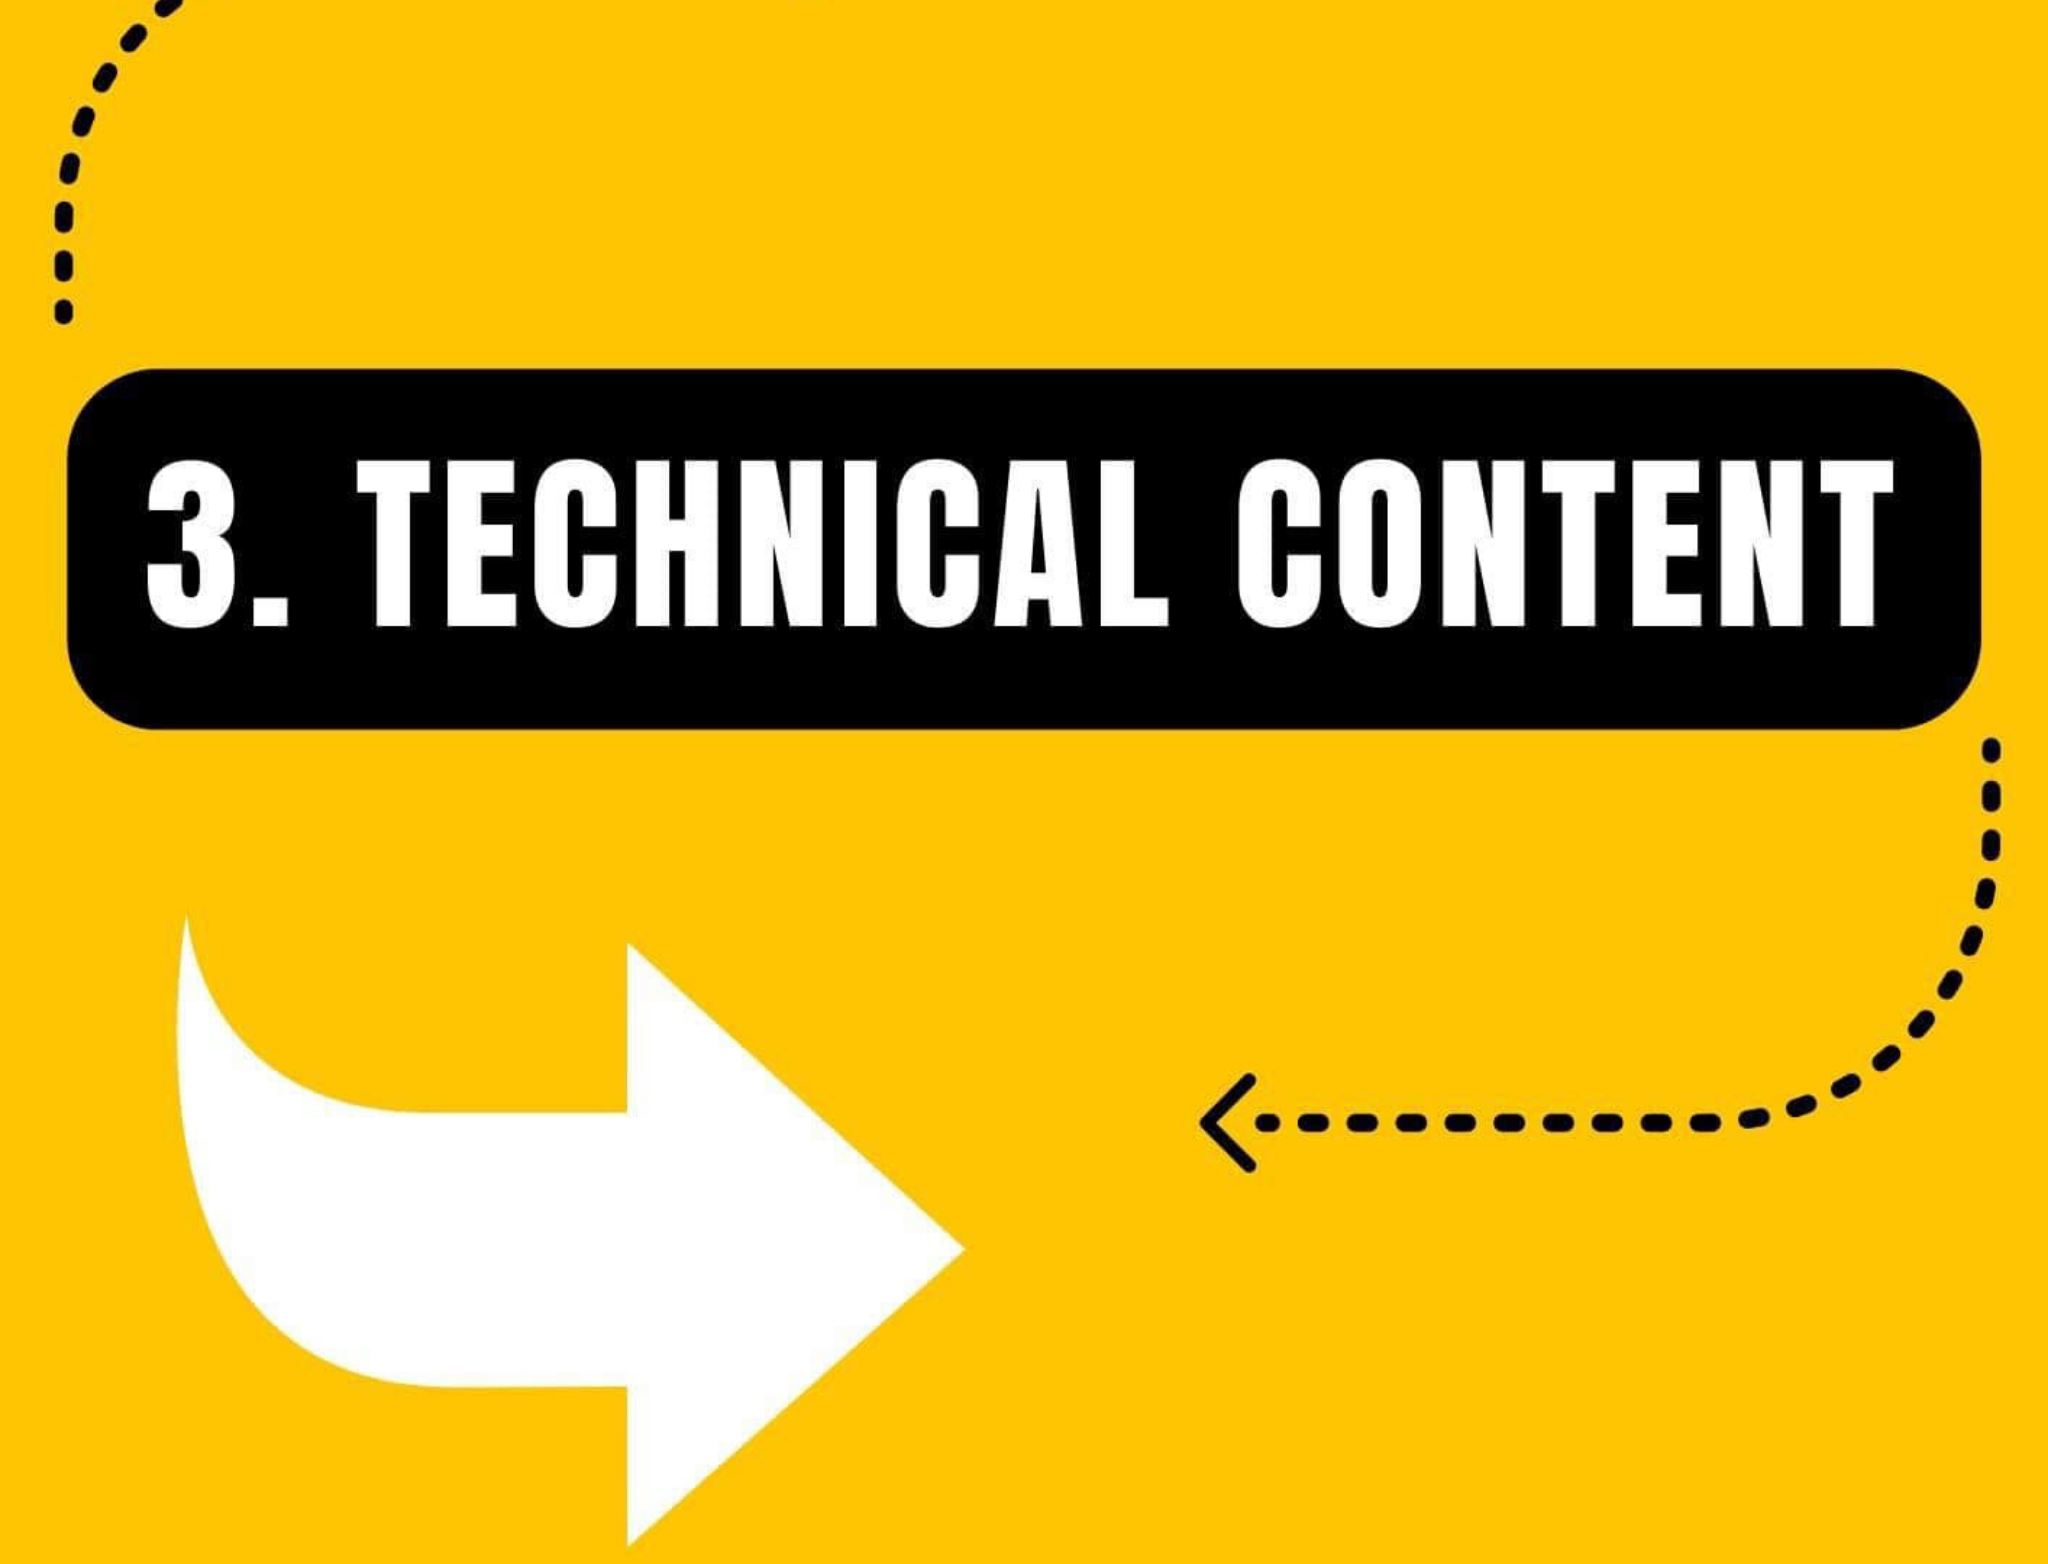 Technical Content